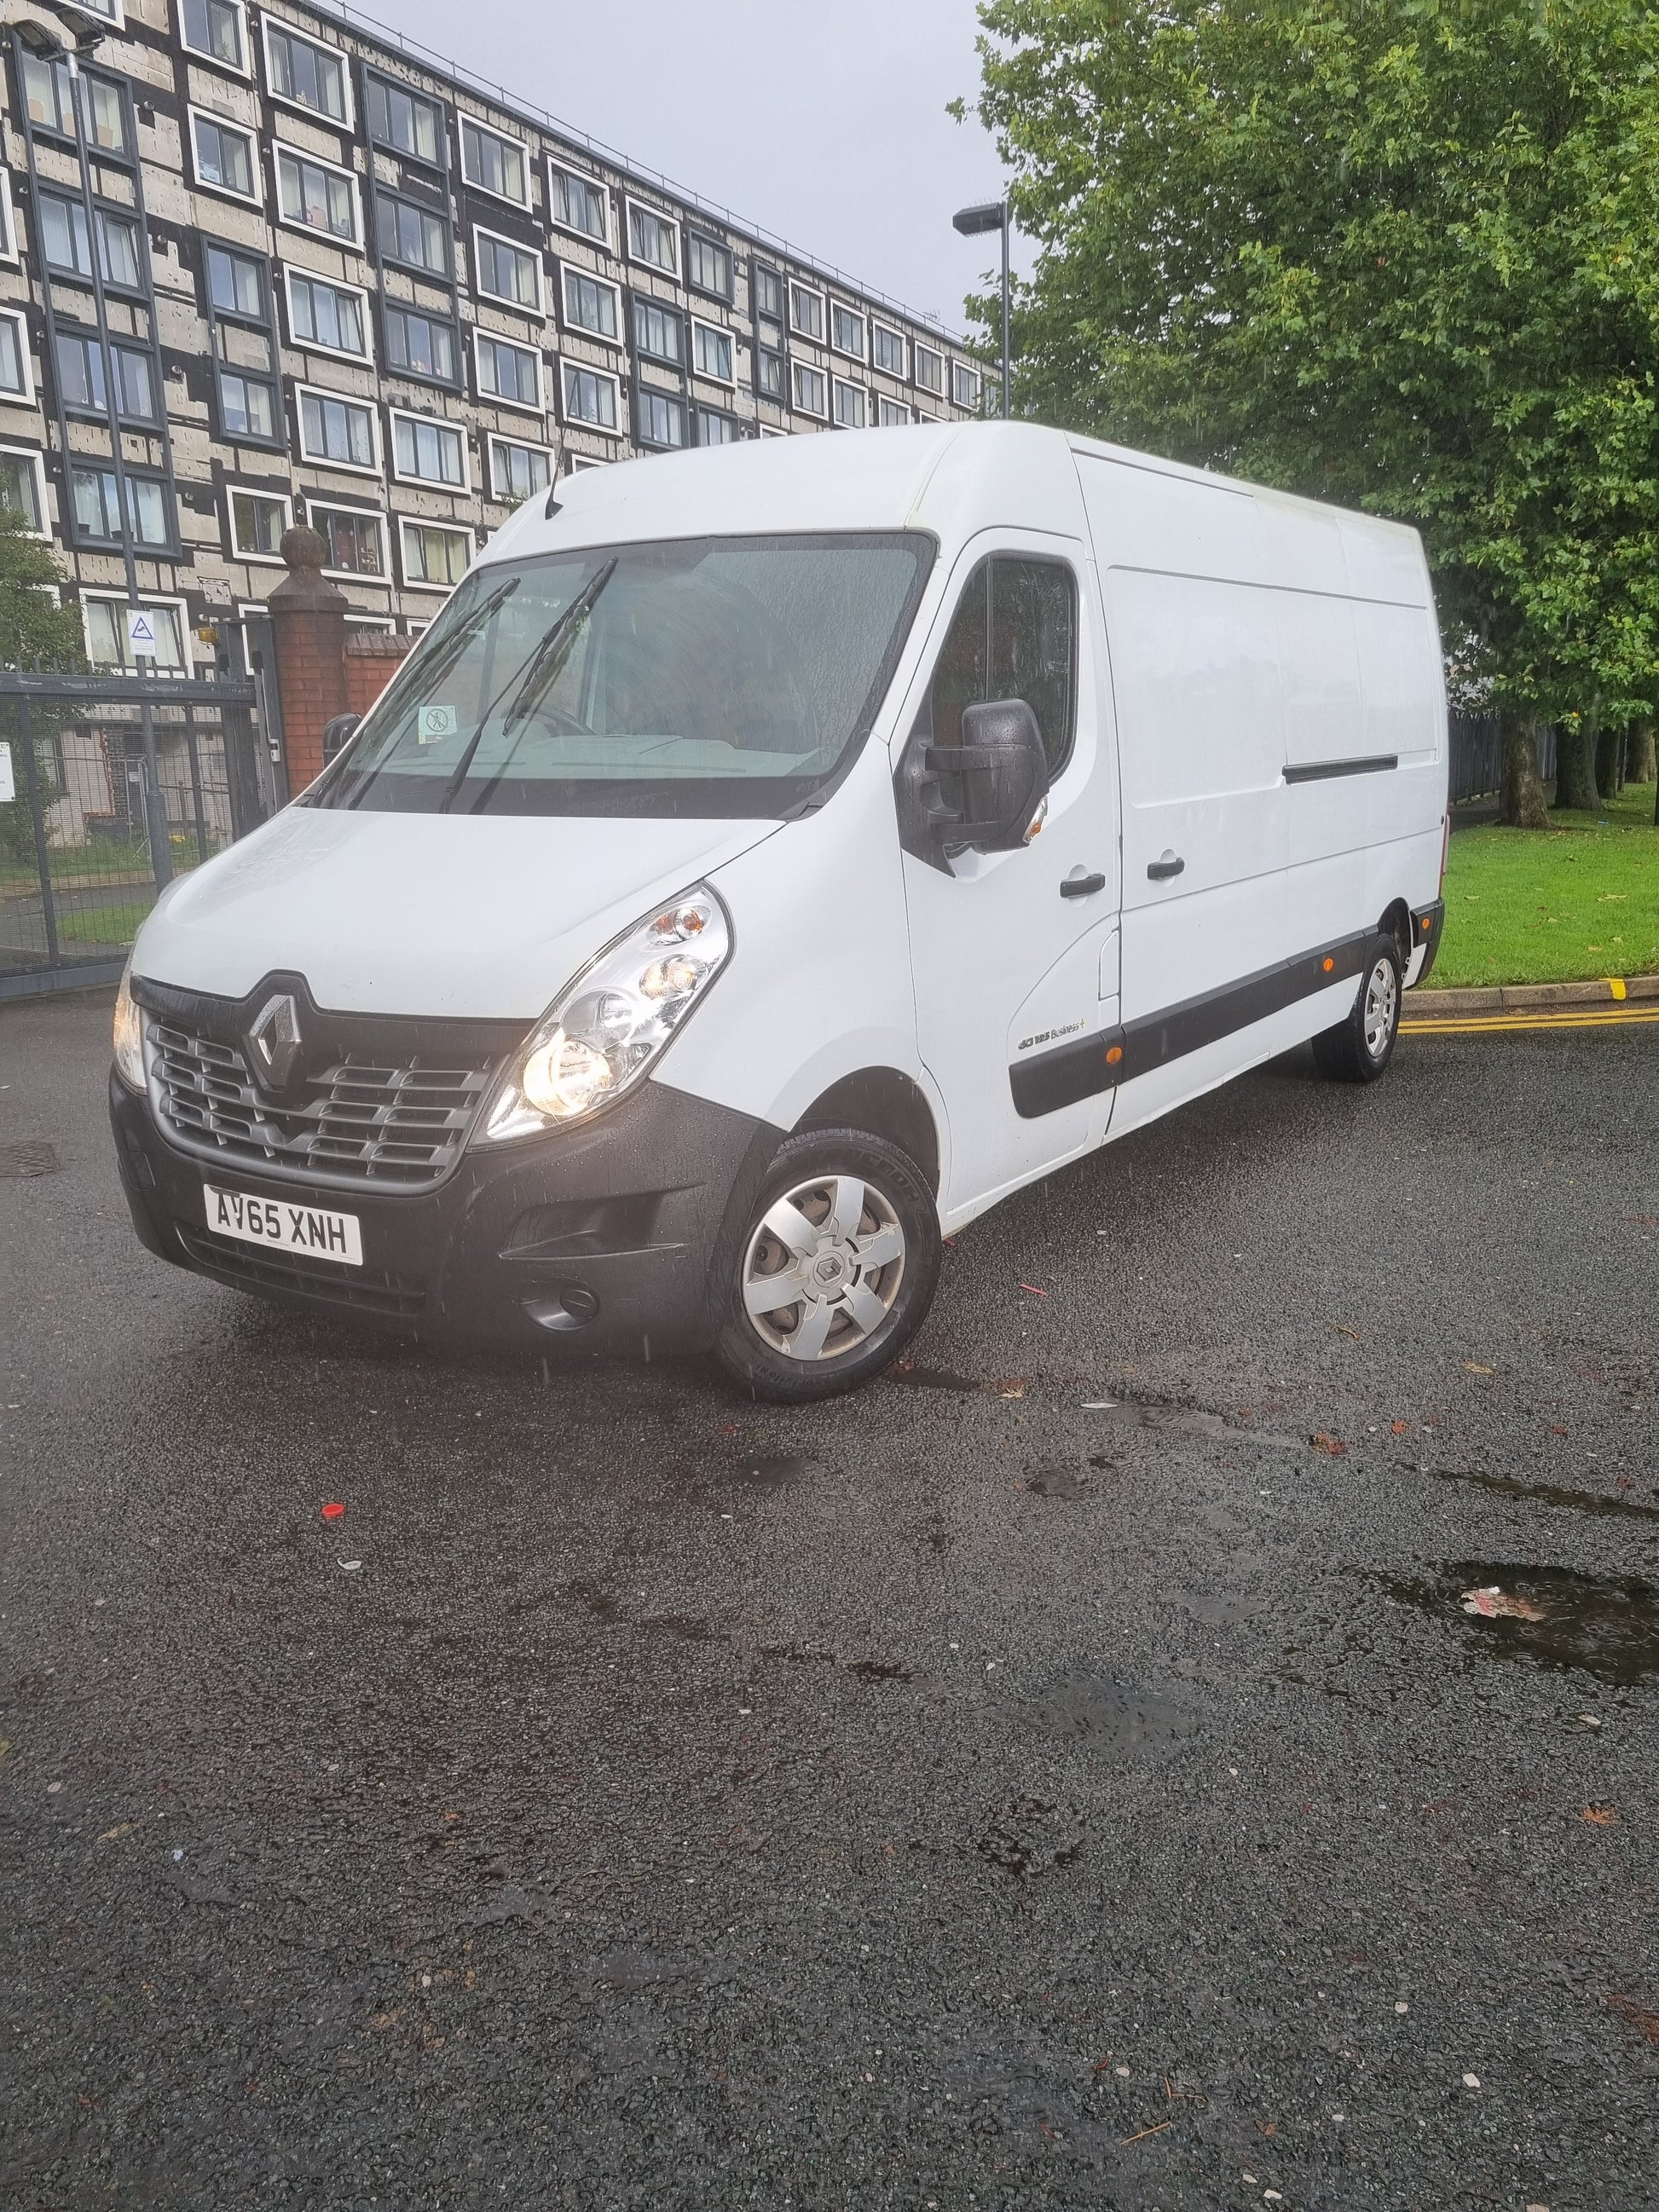 Bid on RENAULT MASTER LWB 2016 BUSINESS 125 12 MONTHS MOT CRUISE CONTROL (NO VAT ON HAMMER)- Buy &amp; Sell on Auction with EAMA Group